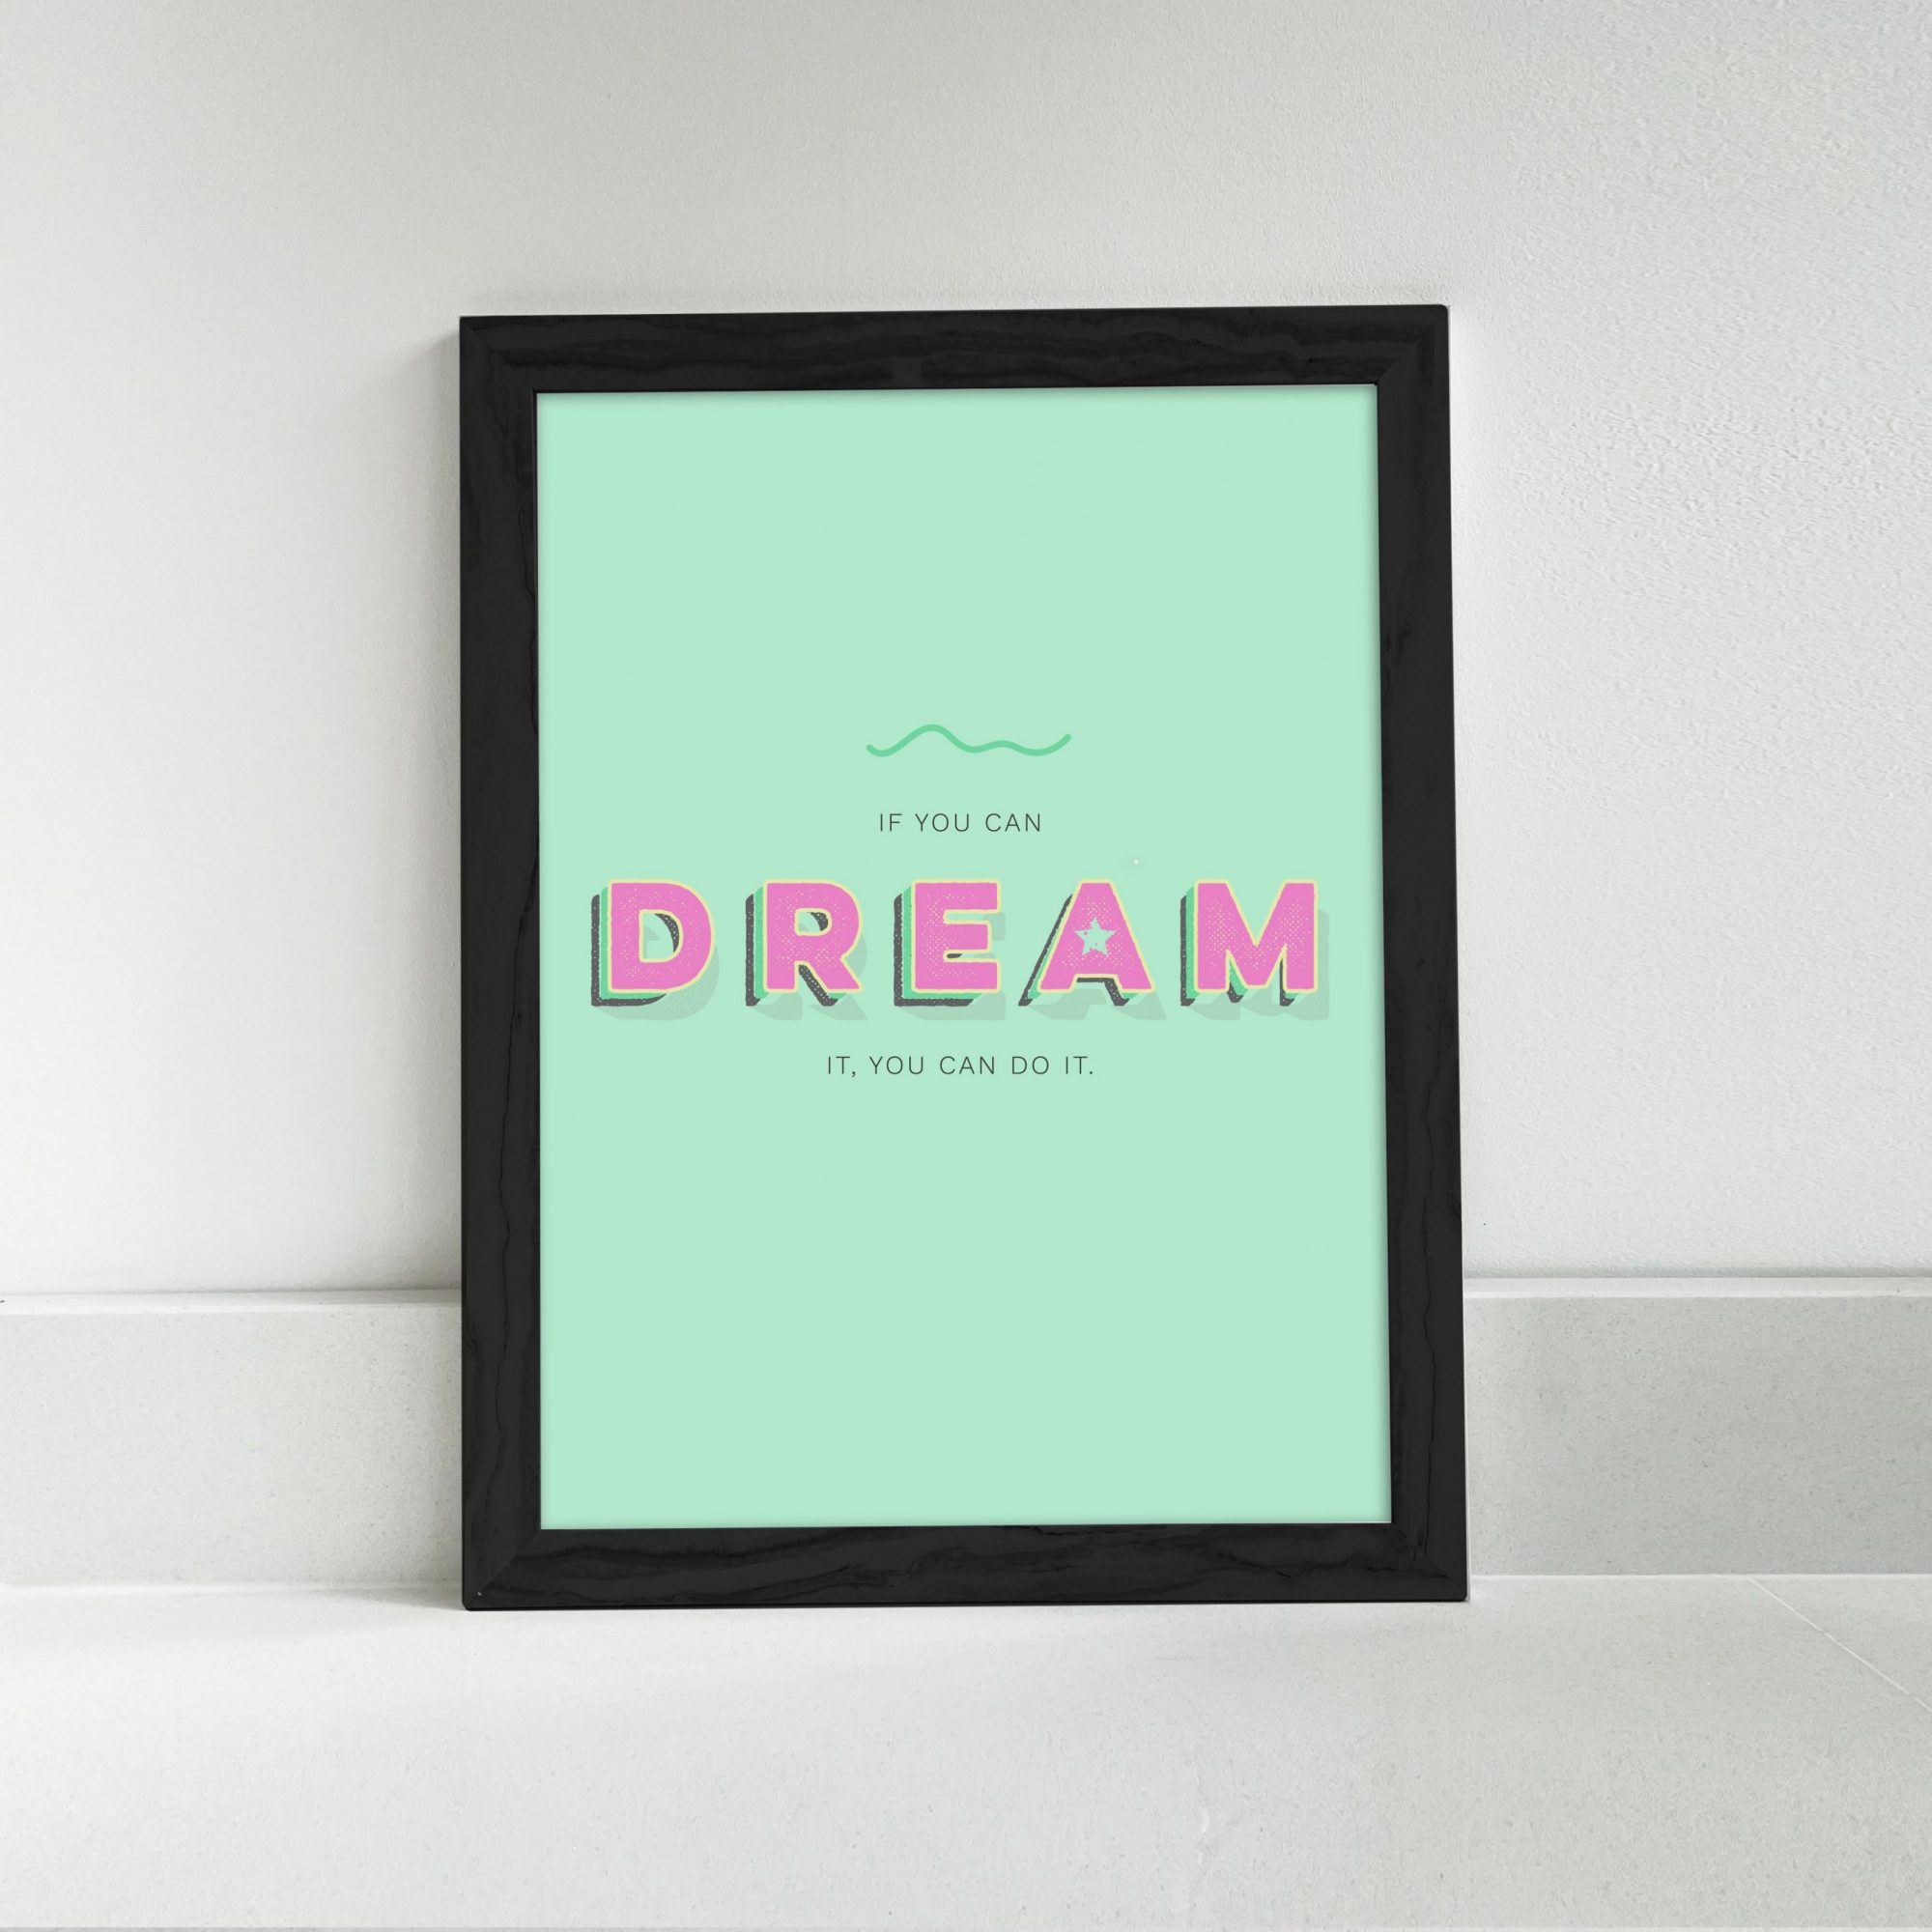 If you can dream it, you can do it - green